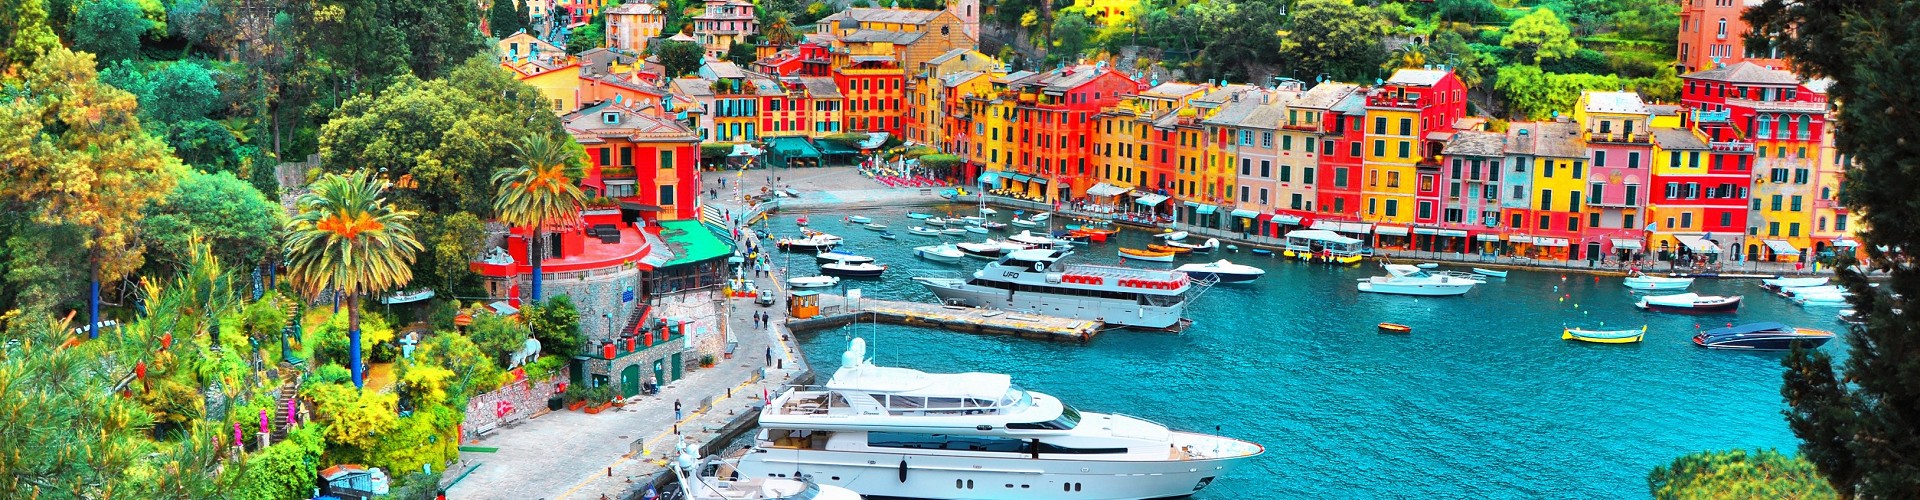 Genoa to Portofino by Car | Safety Measures Car Rental with Driver Italy